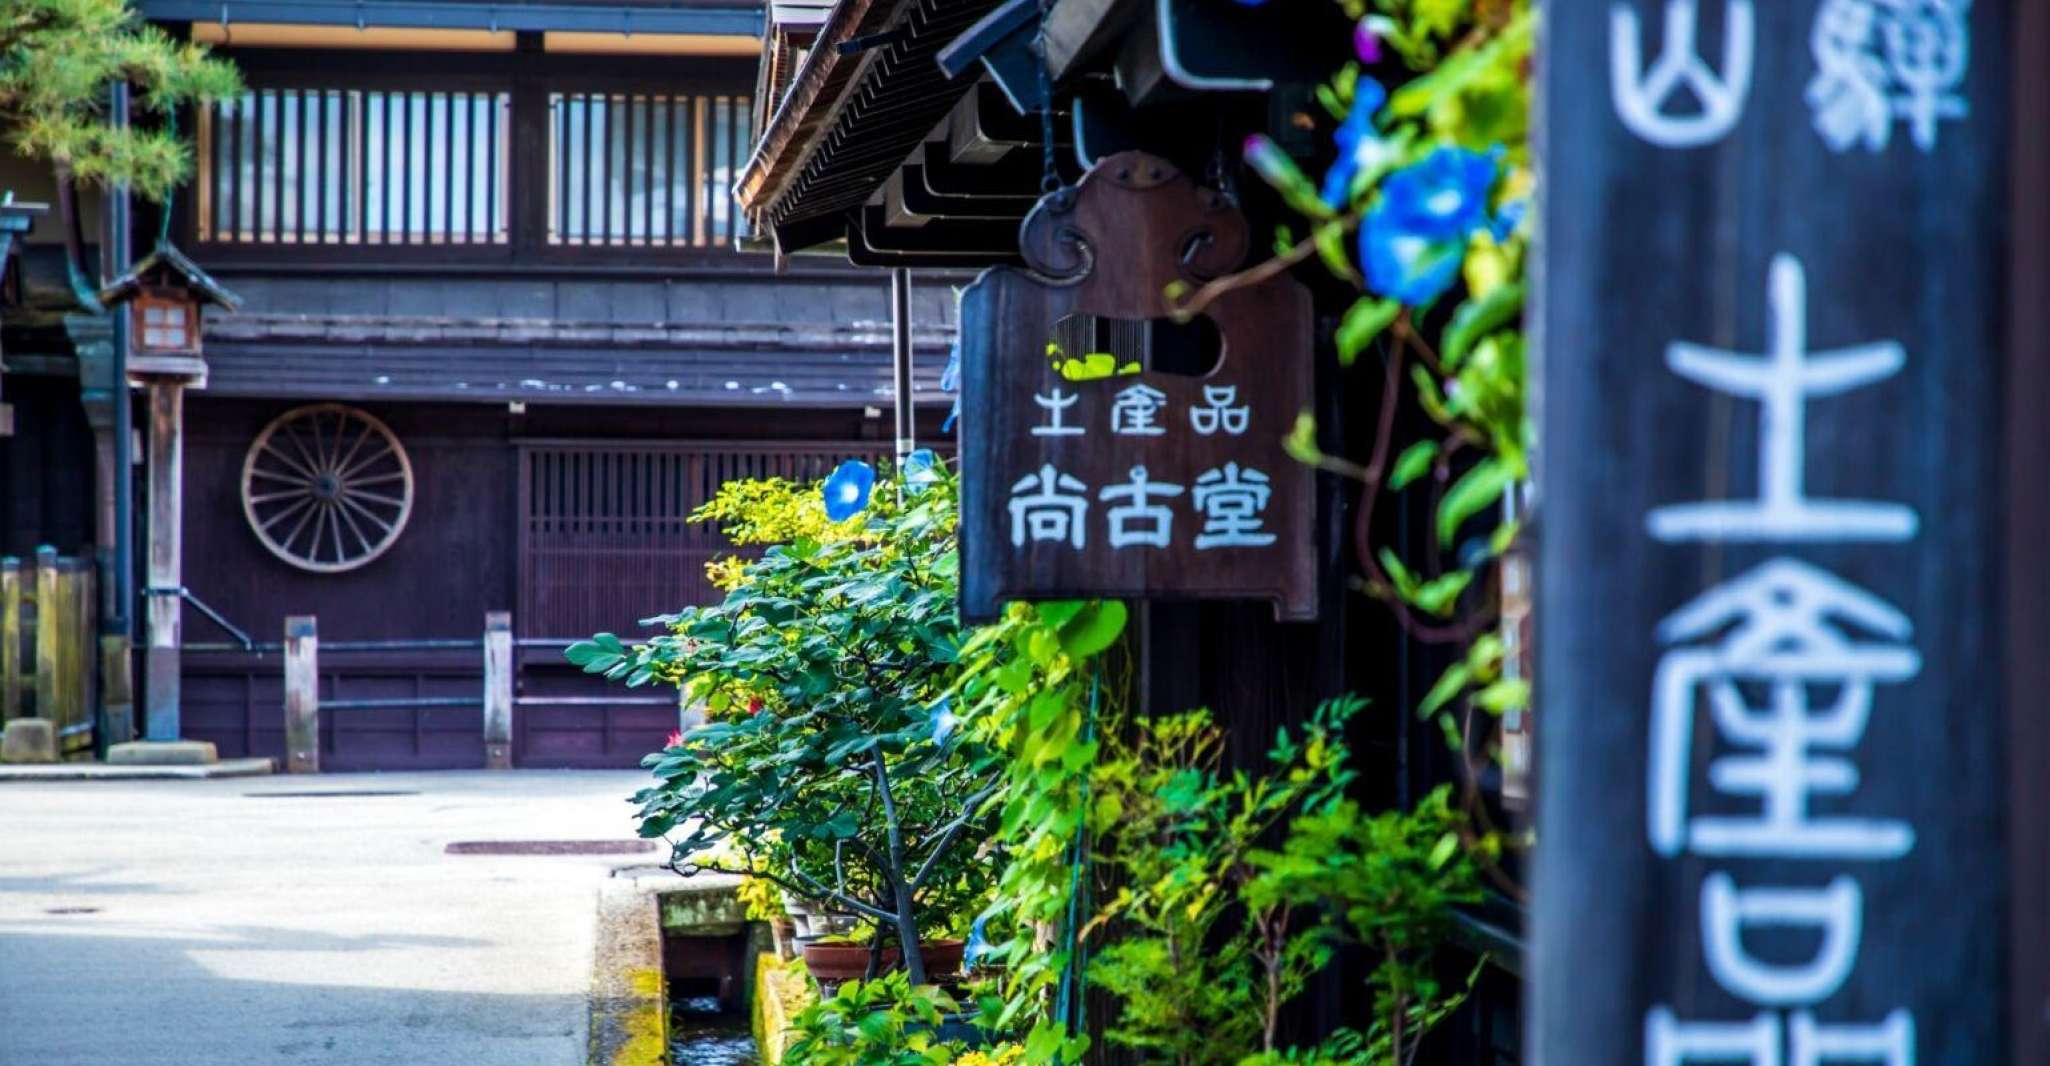 From Takayama, Immerse in Takayama's Rich History and Temple - Housity